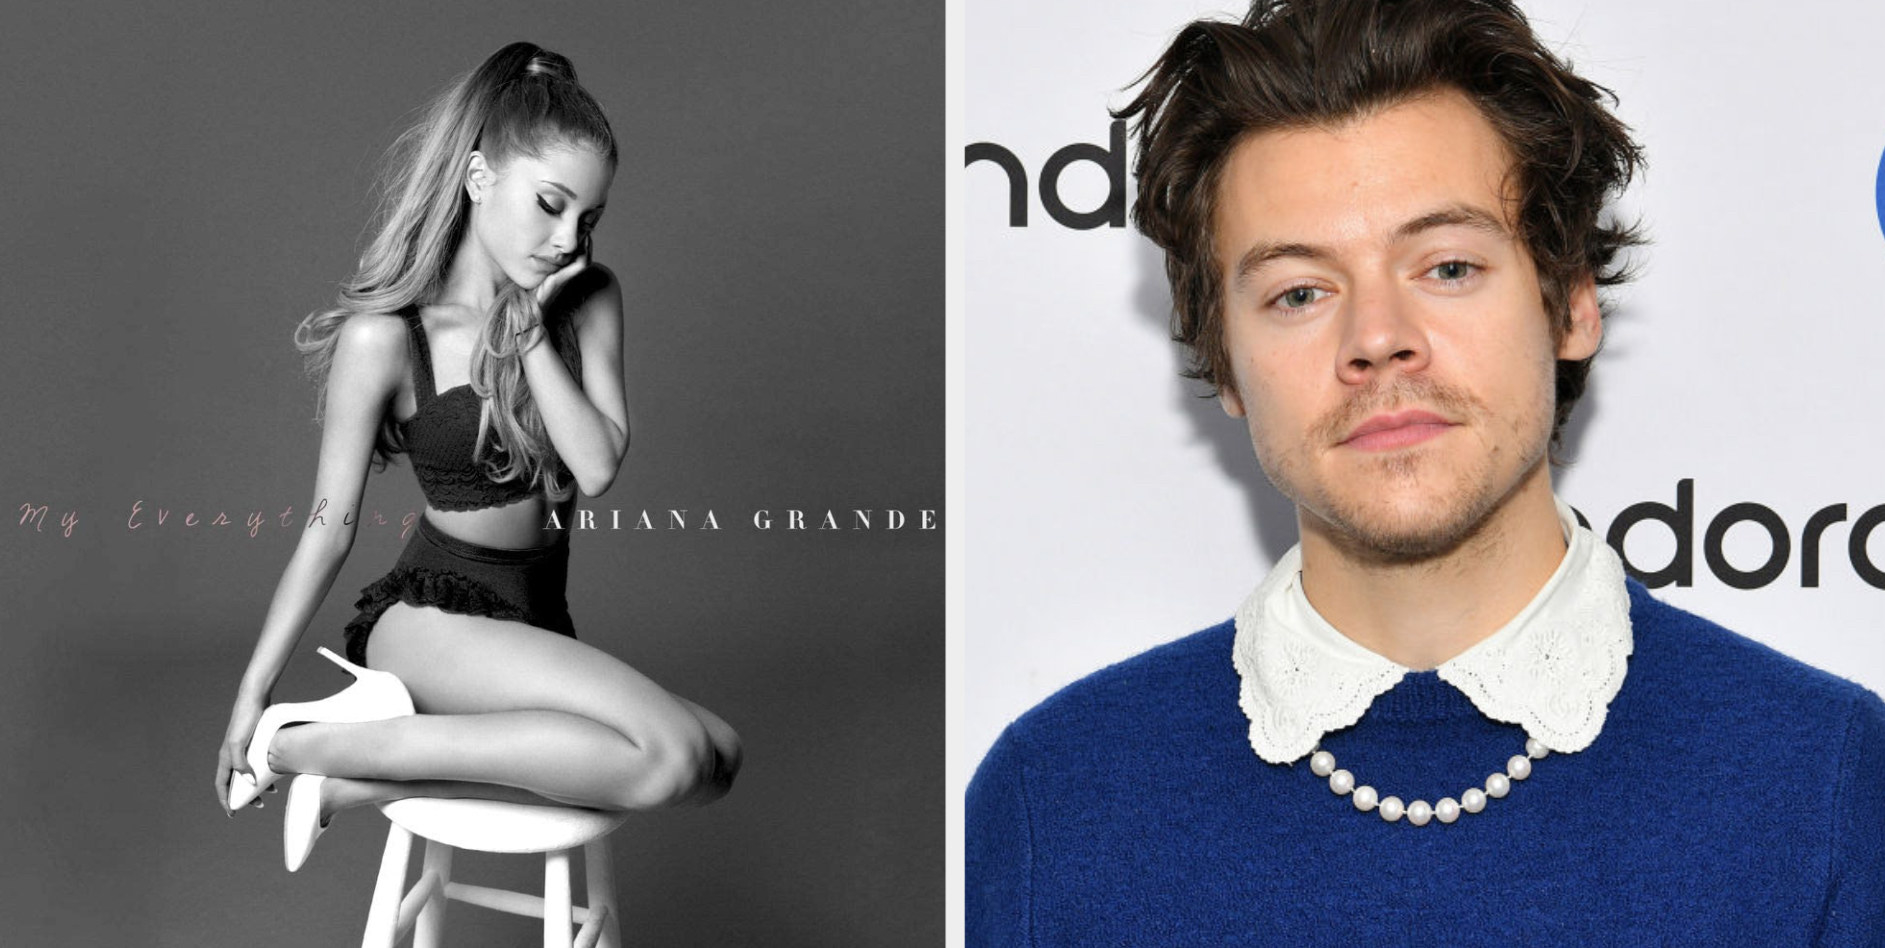 Ariana Grande sitting on a stool for her &quot;My Everything&quot; album cover; Harry Styles wearing pearls on a red carpet